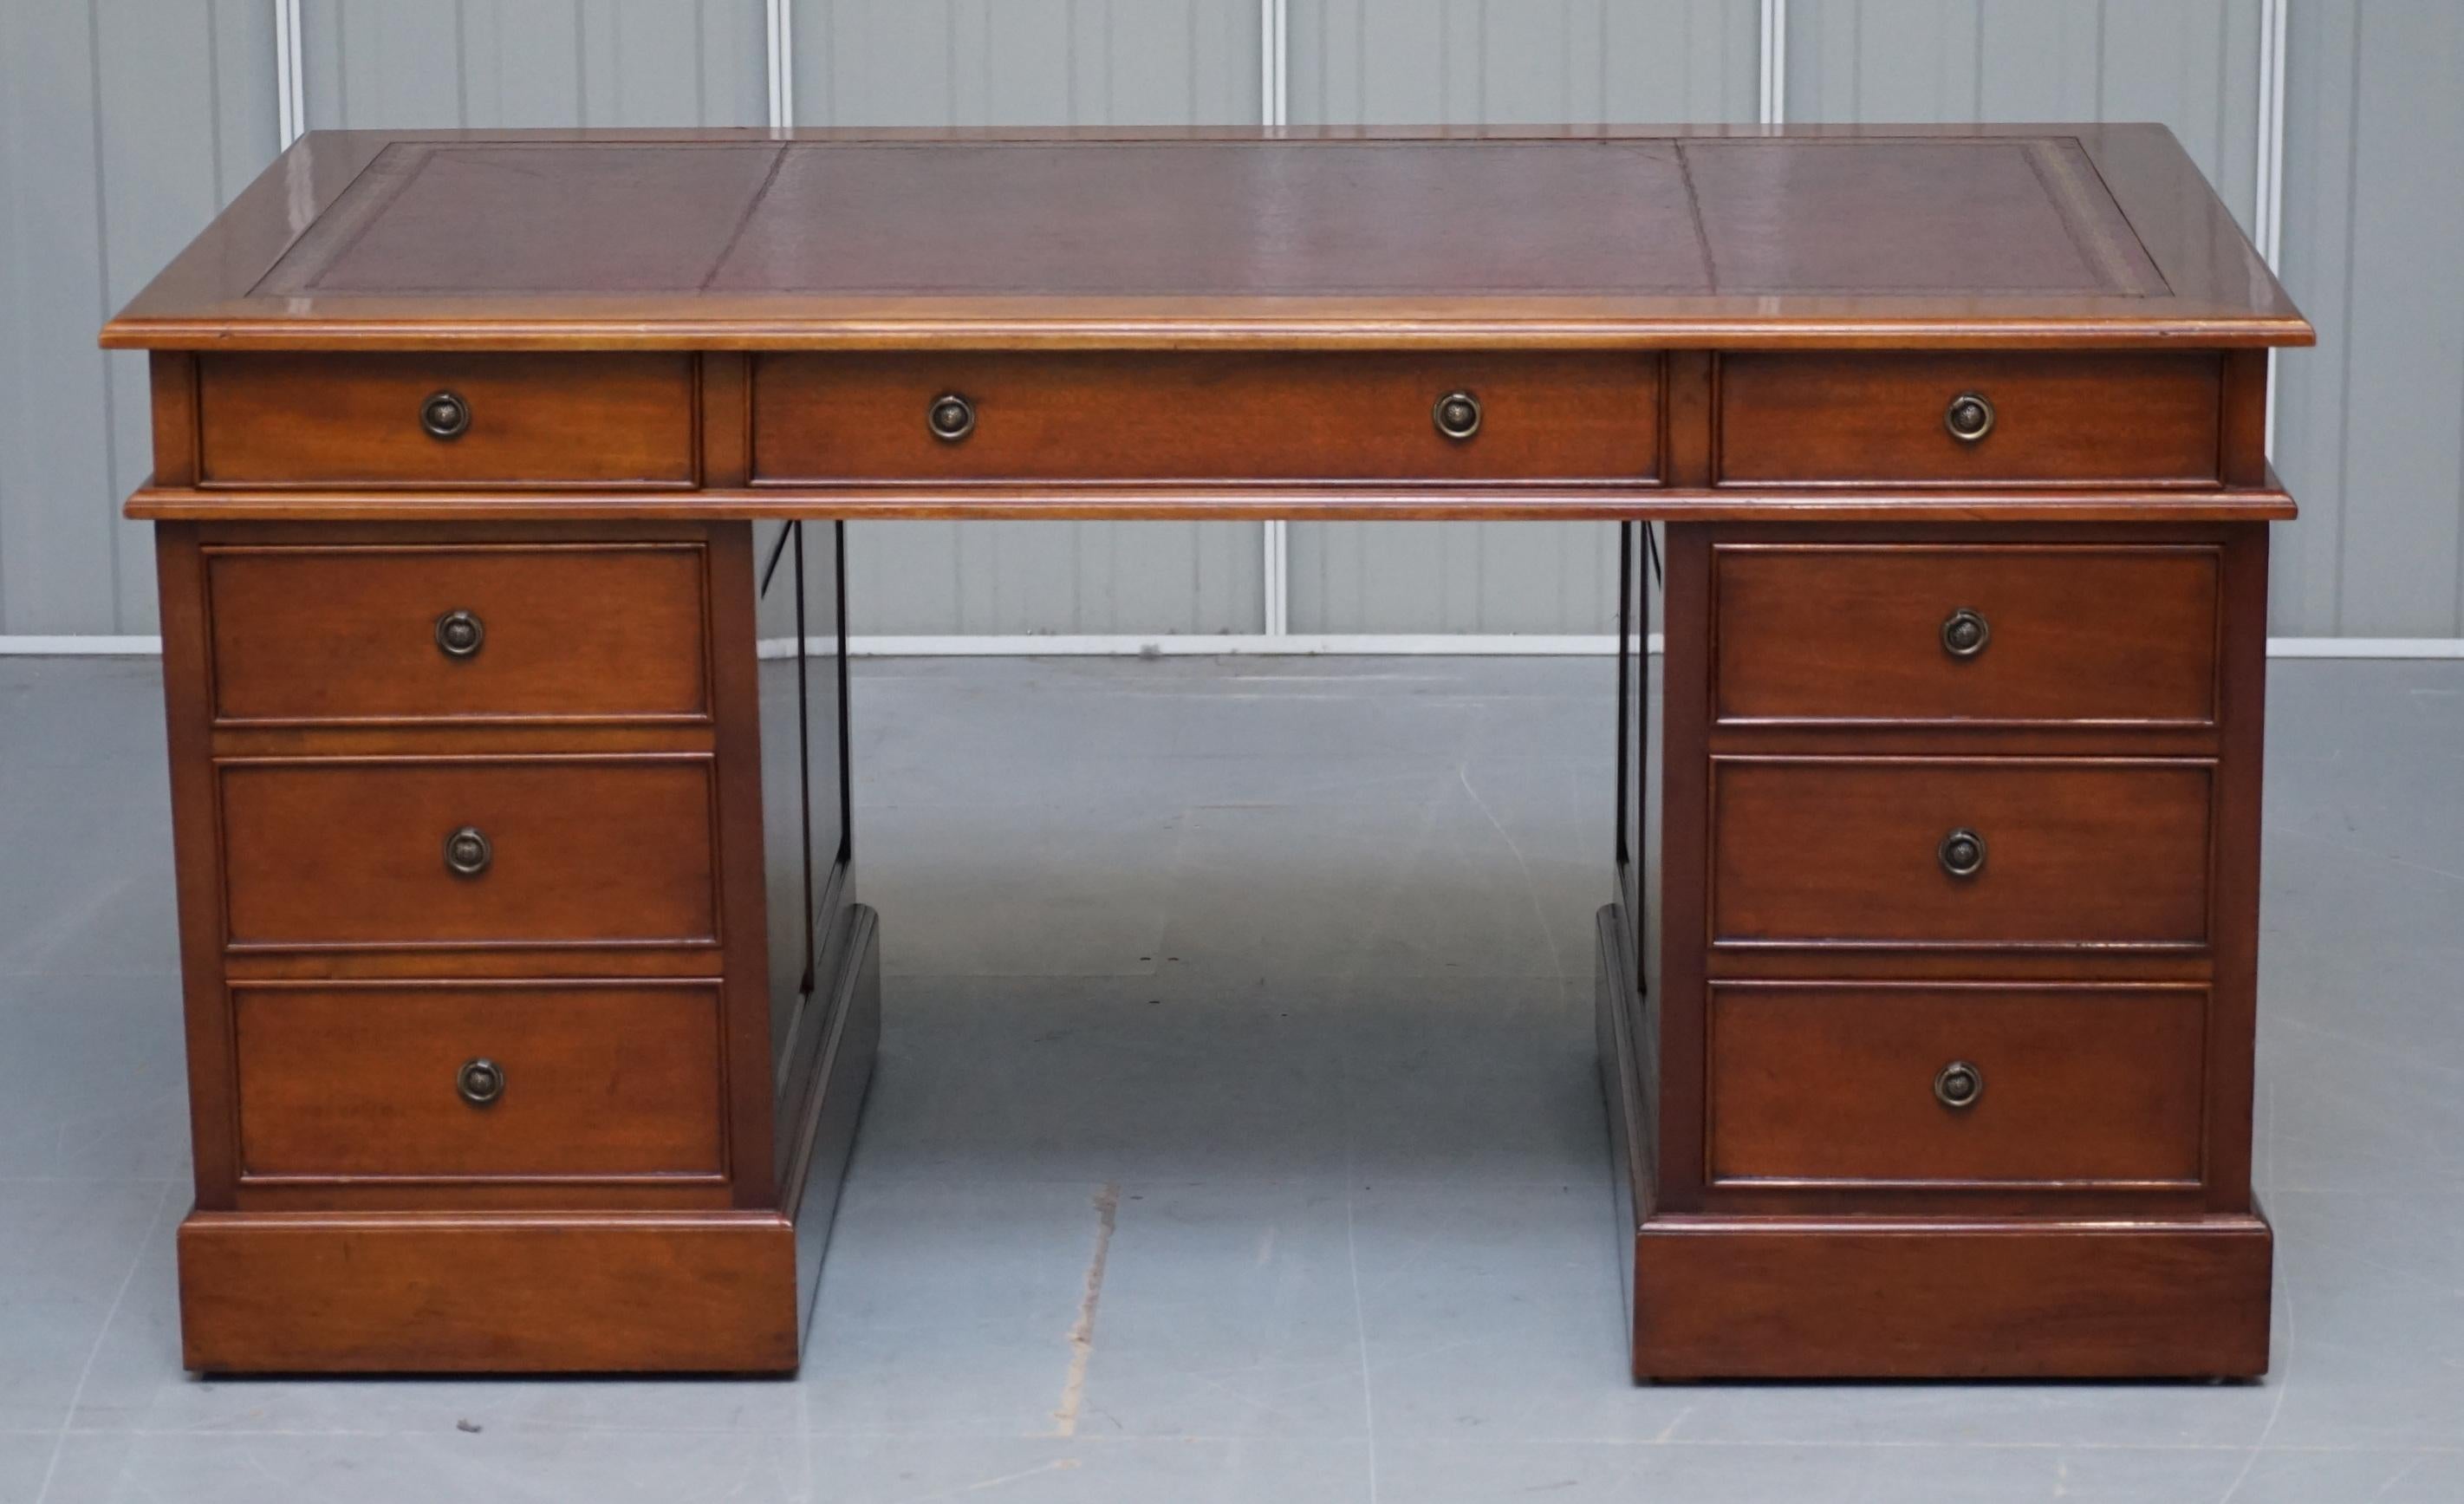 We are delighted to offer for sale this lovely panelled Cherry wood twin pedestal partner desk with oxblood leather writing surface 

A very good looking and well made desk, it has panelled sides and back, all cherry wood with an oxblood leather